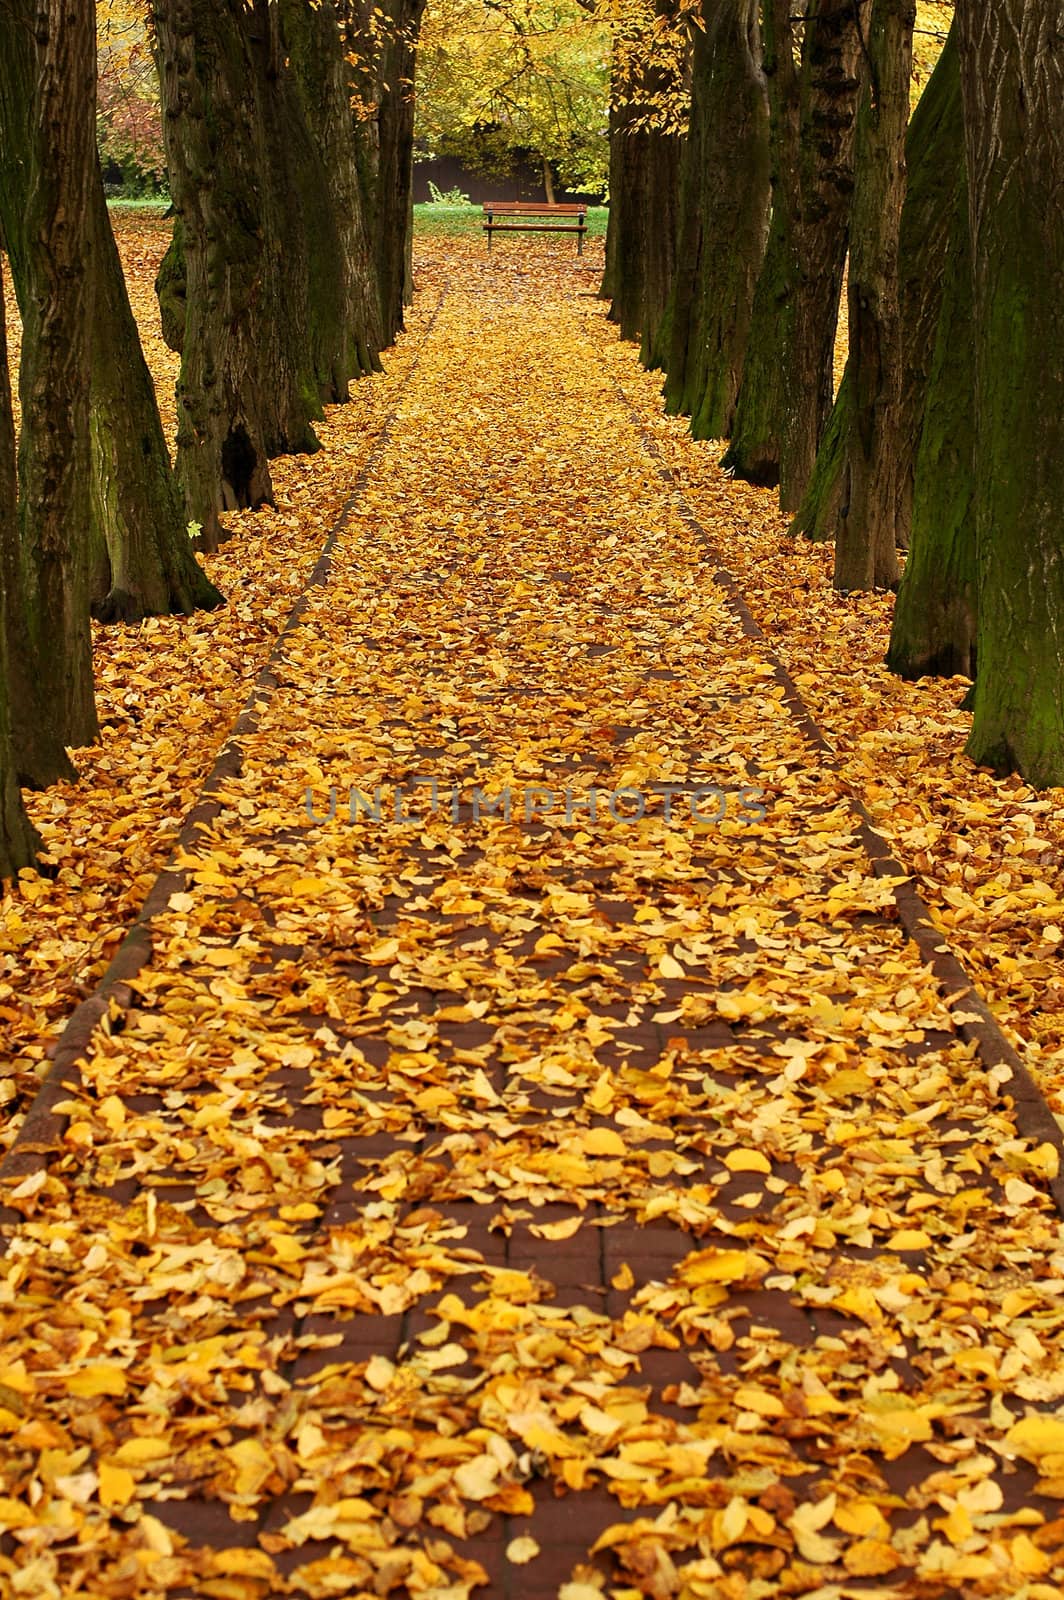 trees alley full of fallen leafs, mainly yellow color